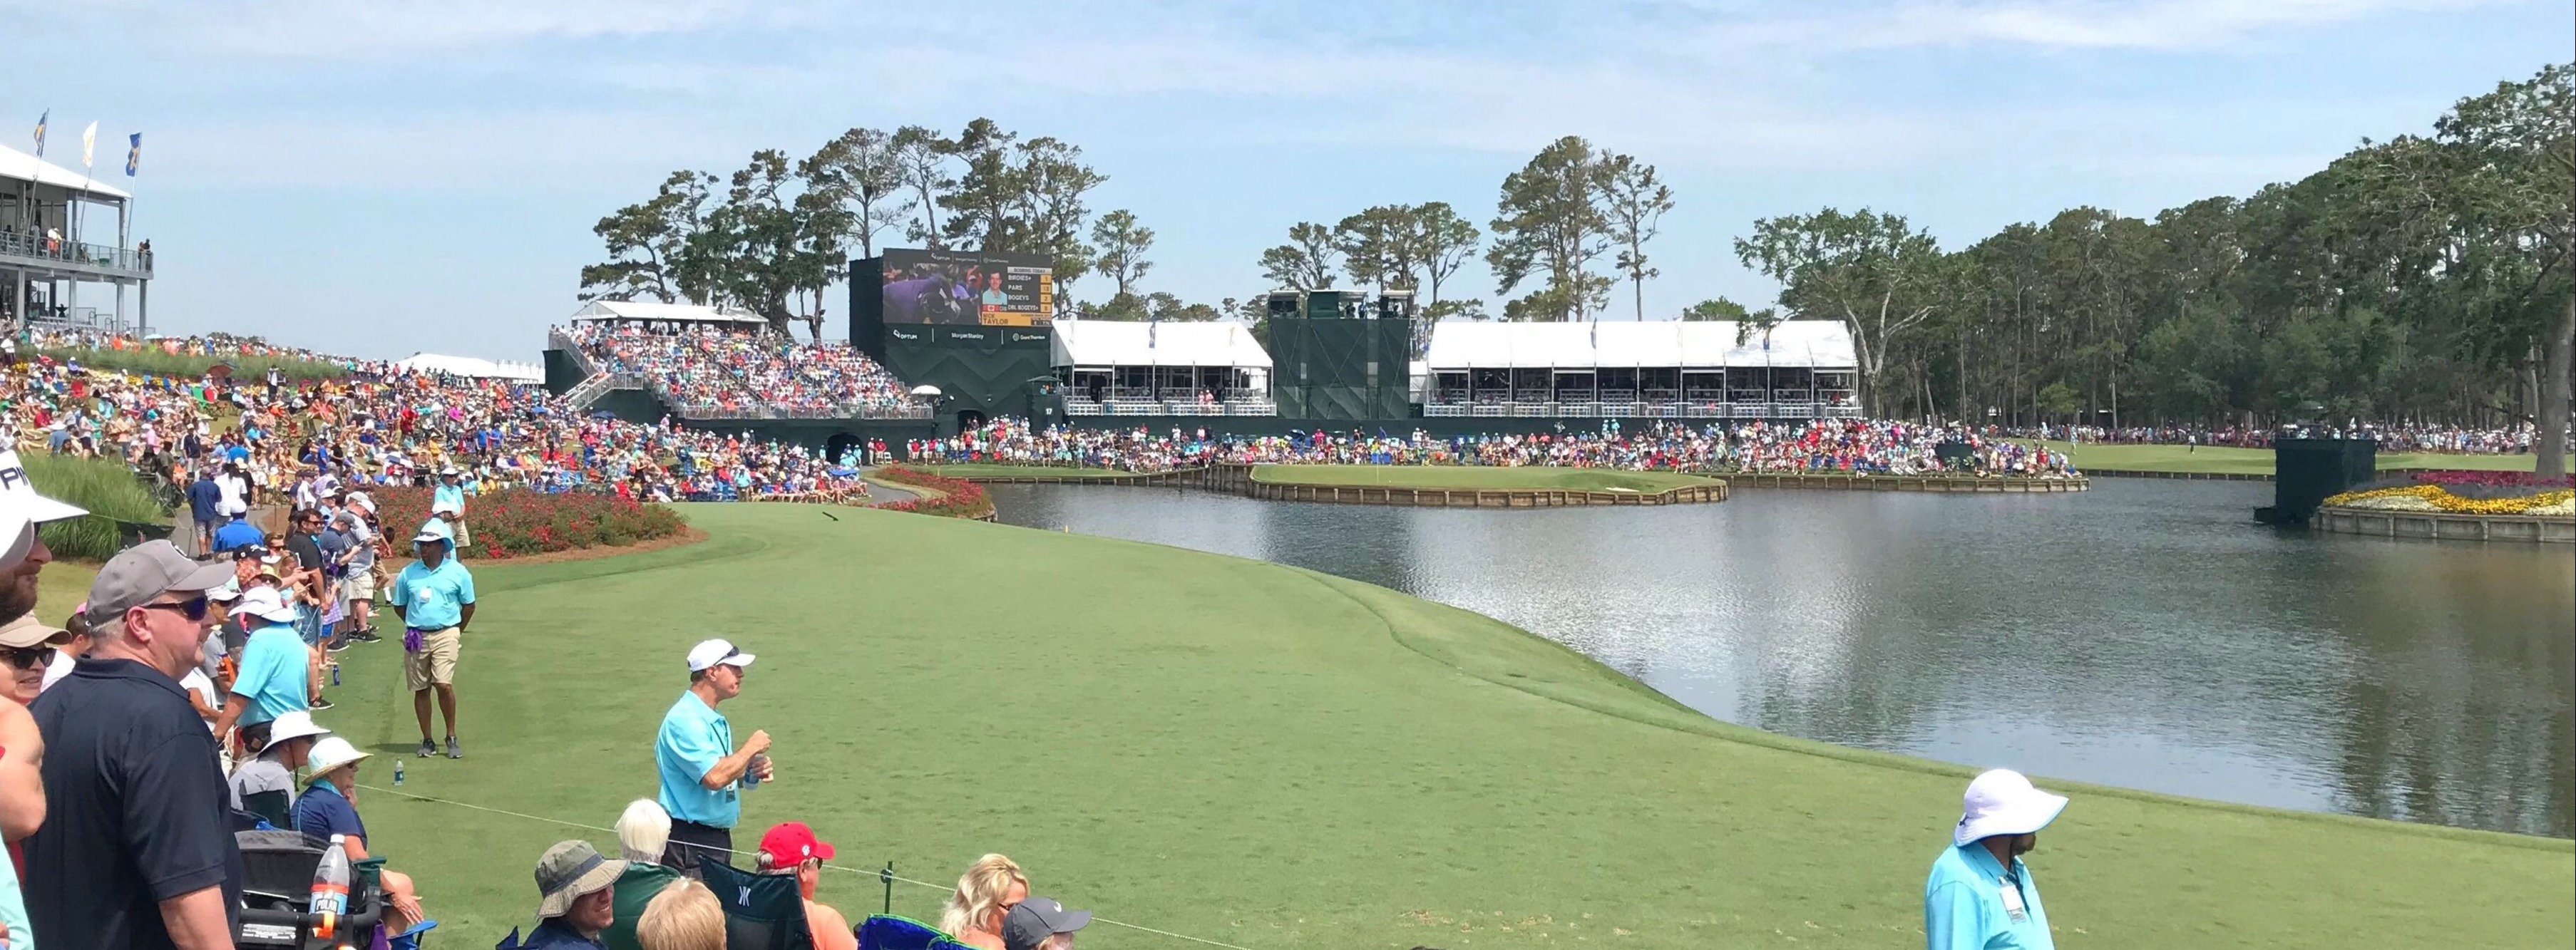 7 Tips for Getting the Most Out of THE PLAYERS Championship